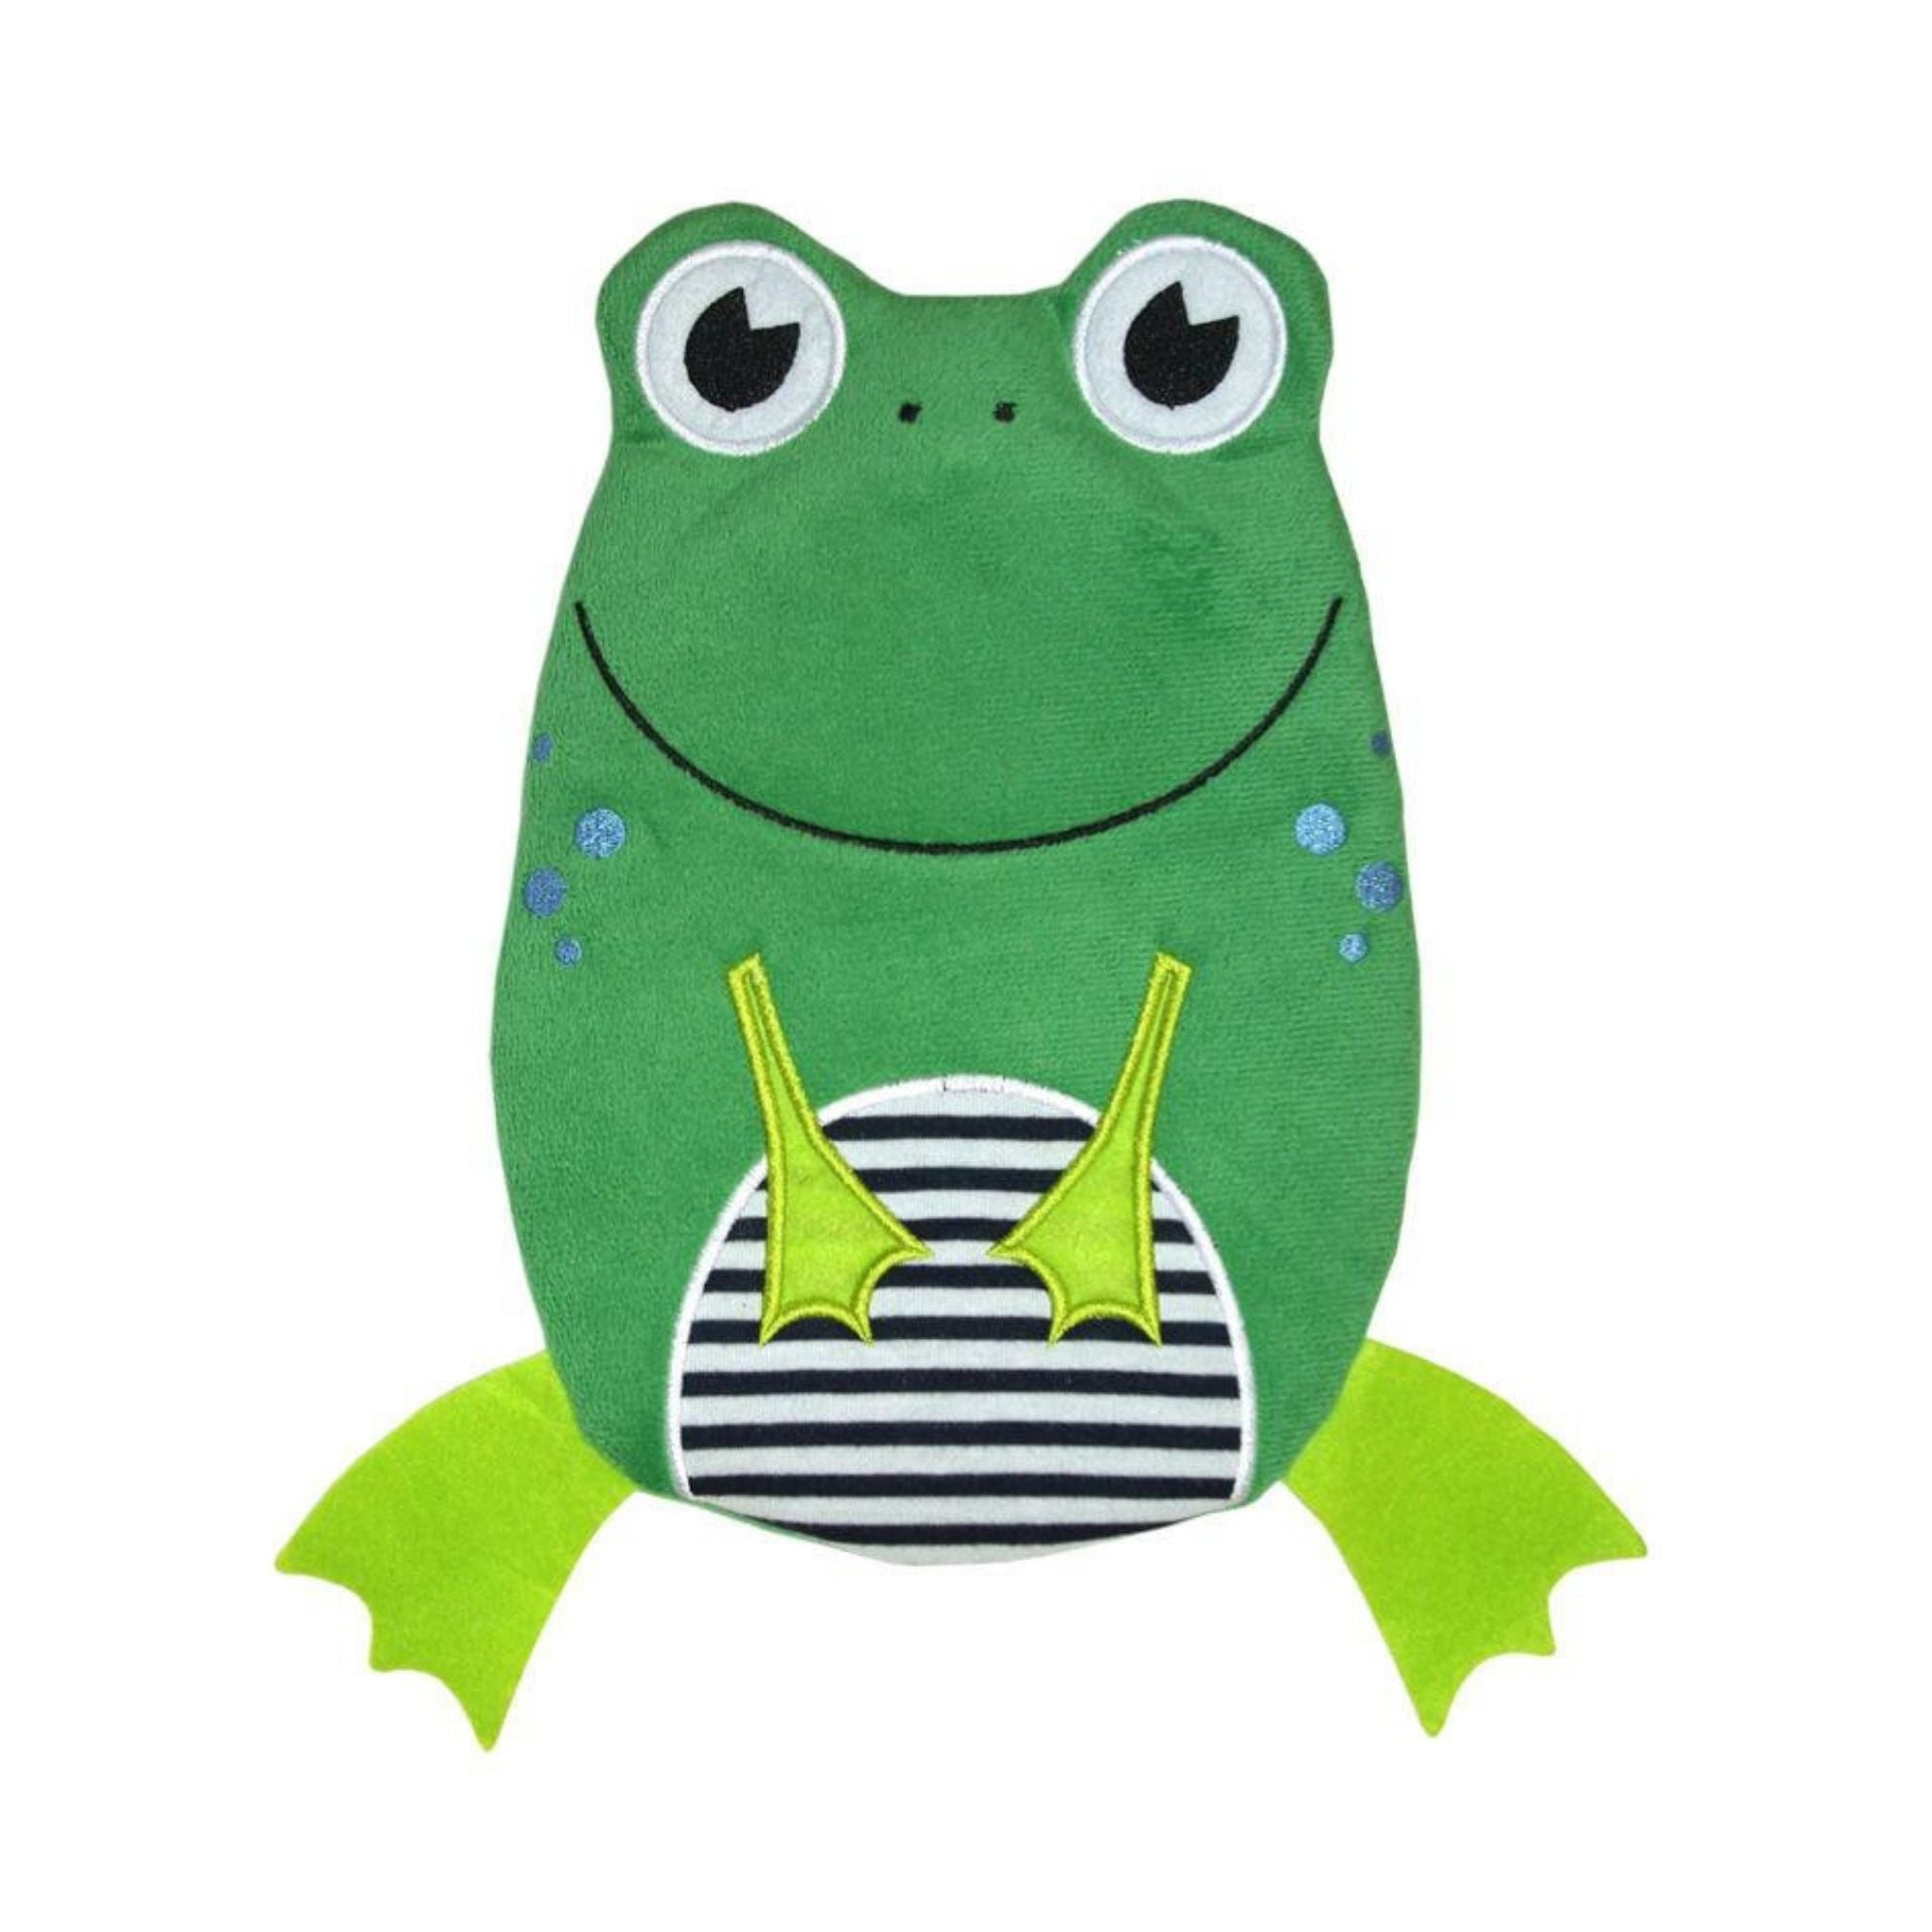 0.8 Litre Eco Hot Water Bottle with Frog Cover - Front